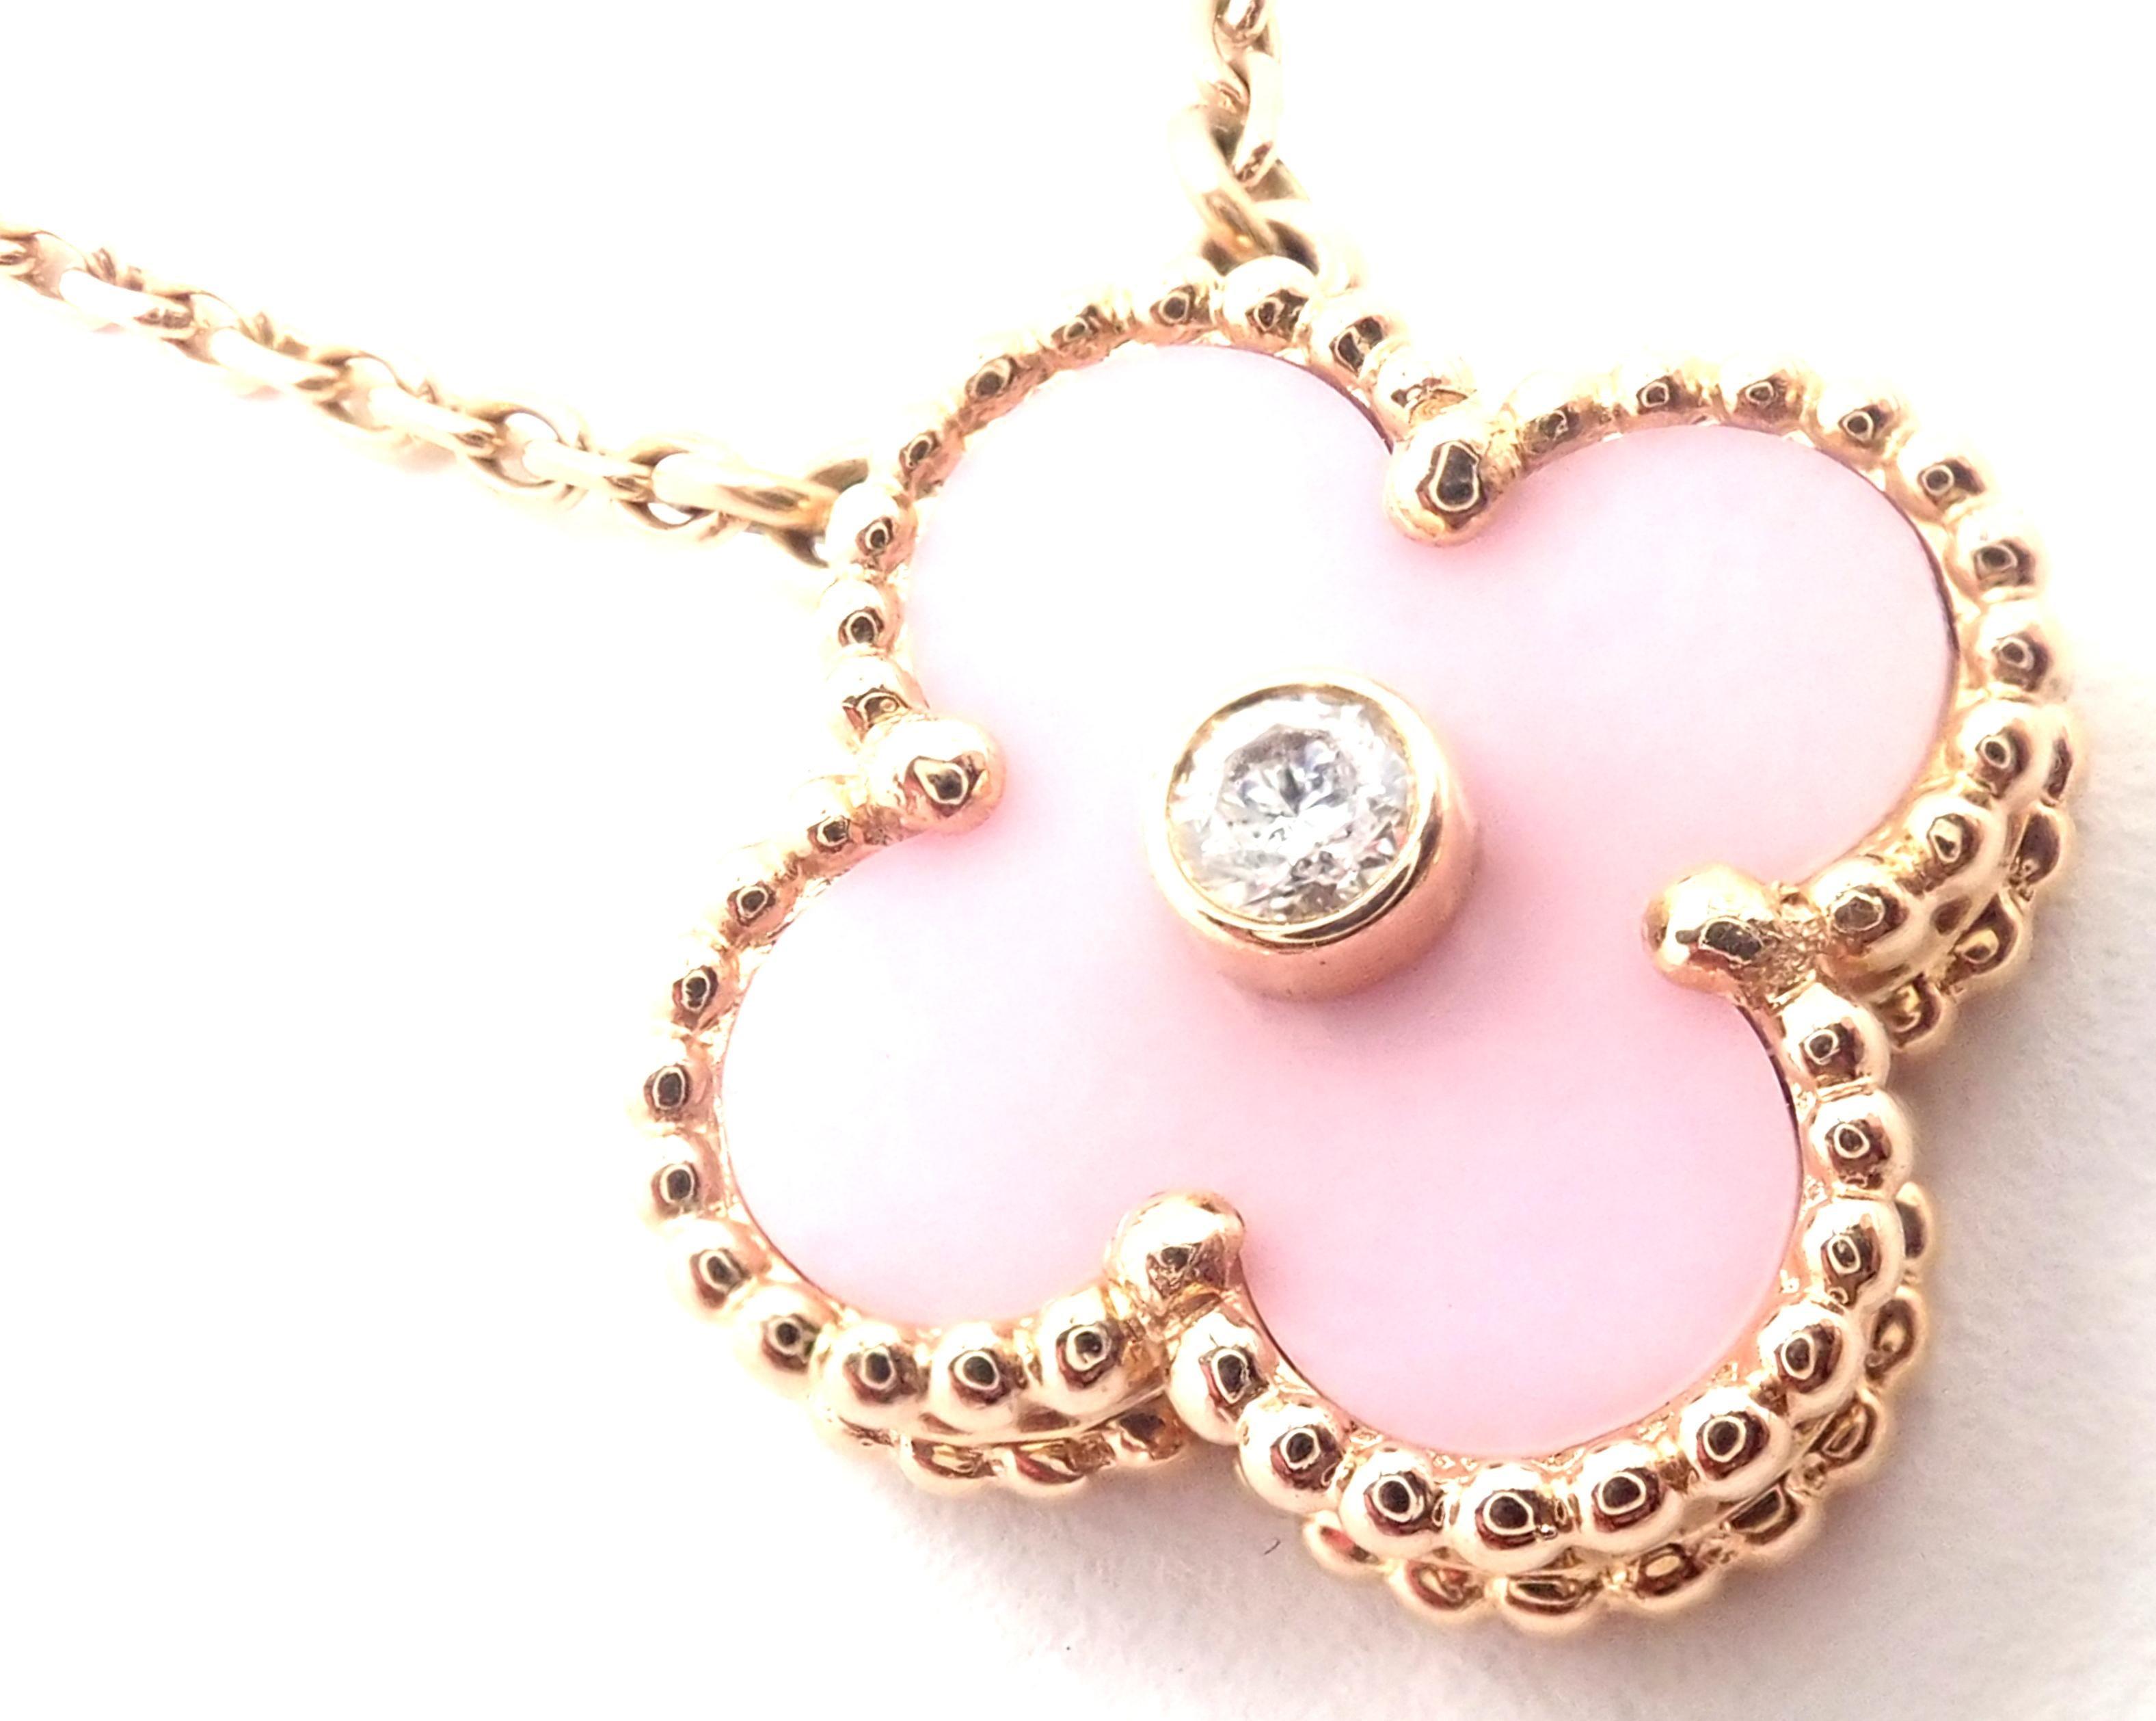 18k Rose Gold Limited Edition Alhambra Diamond And Pink Porcelain Necklace. 
With 1 alhambra shape pink porcelain clover 15mm
1 round brilliant cut diamond VVS1 clarity, E color total weigh approx. .06ct
This necklace is LIMITED EDITION Van Cleef